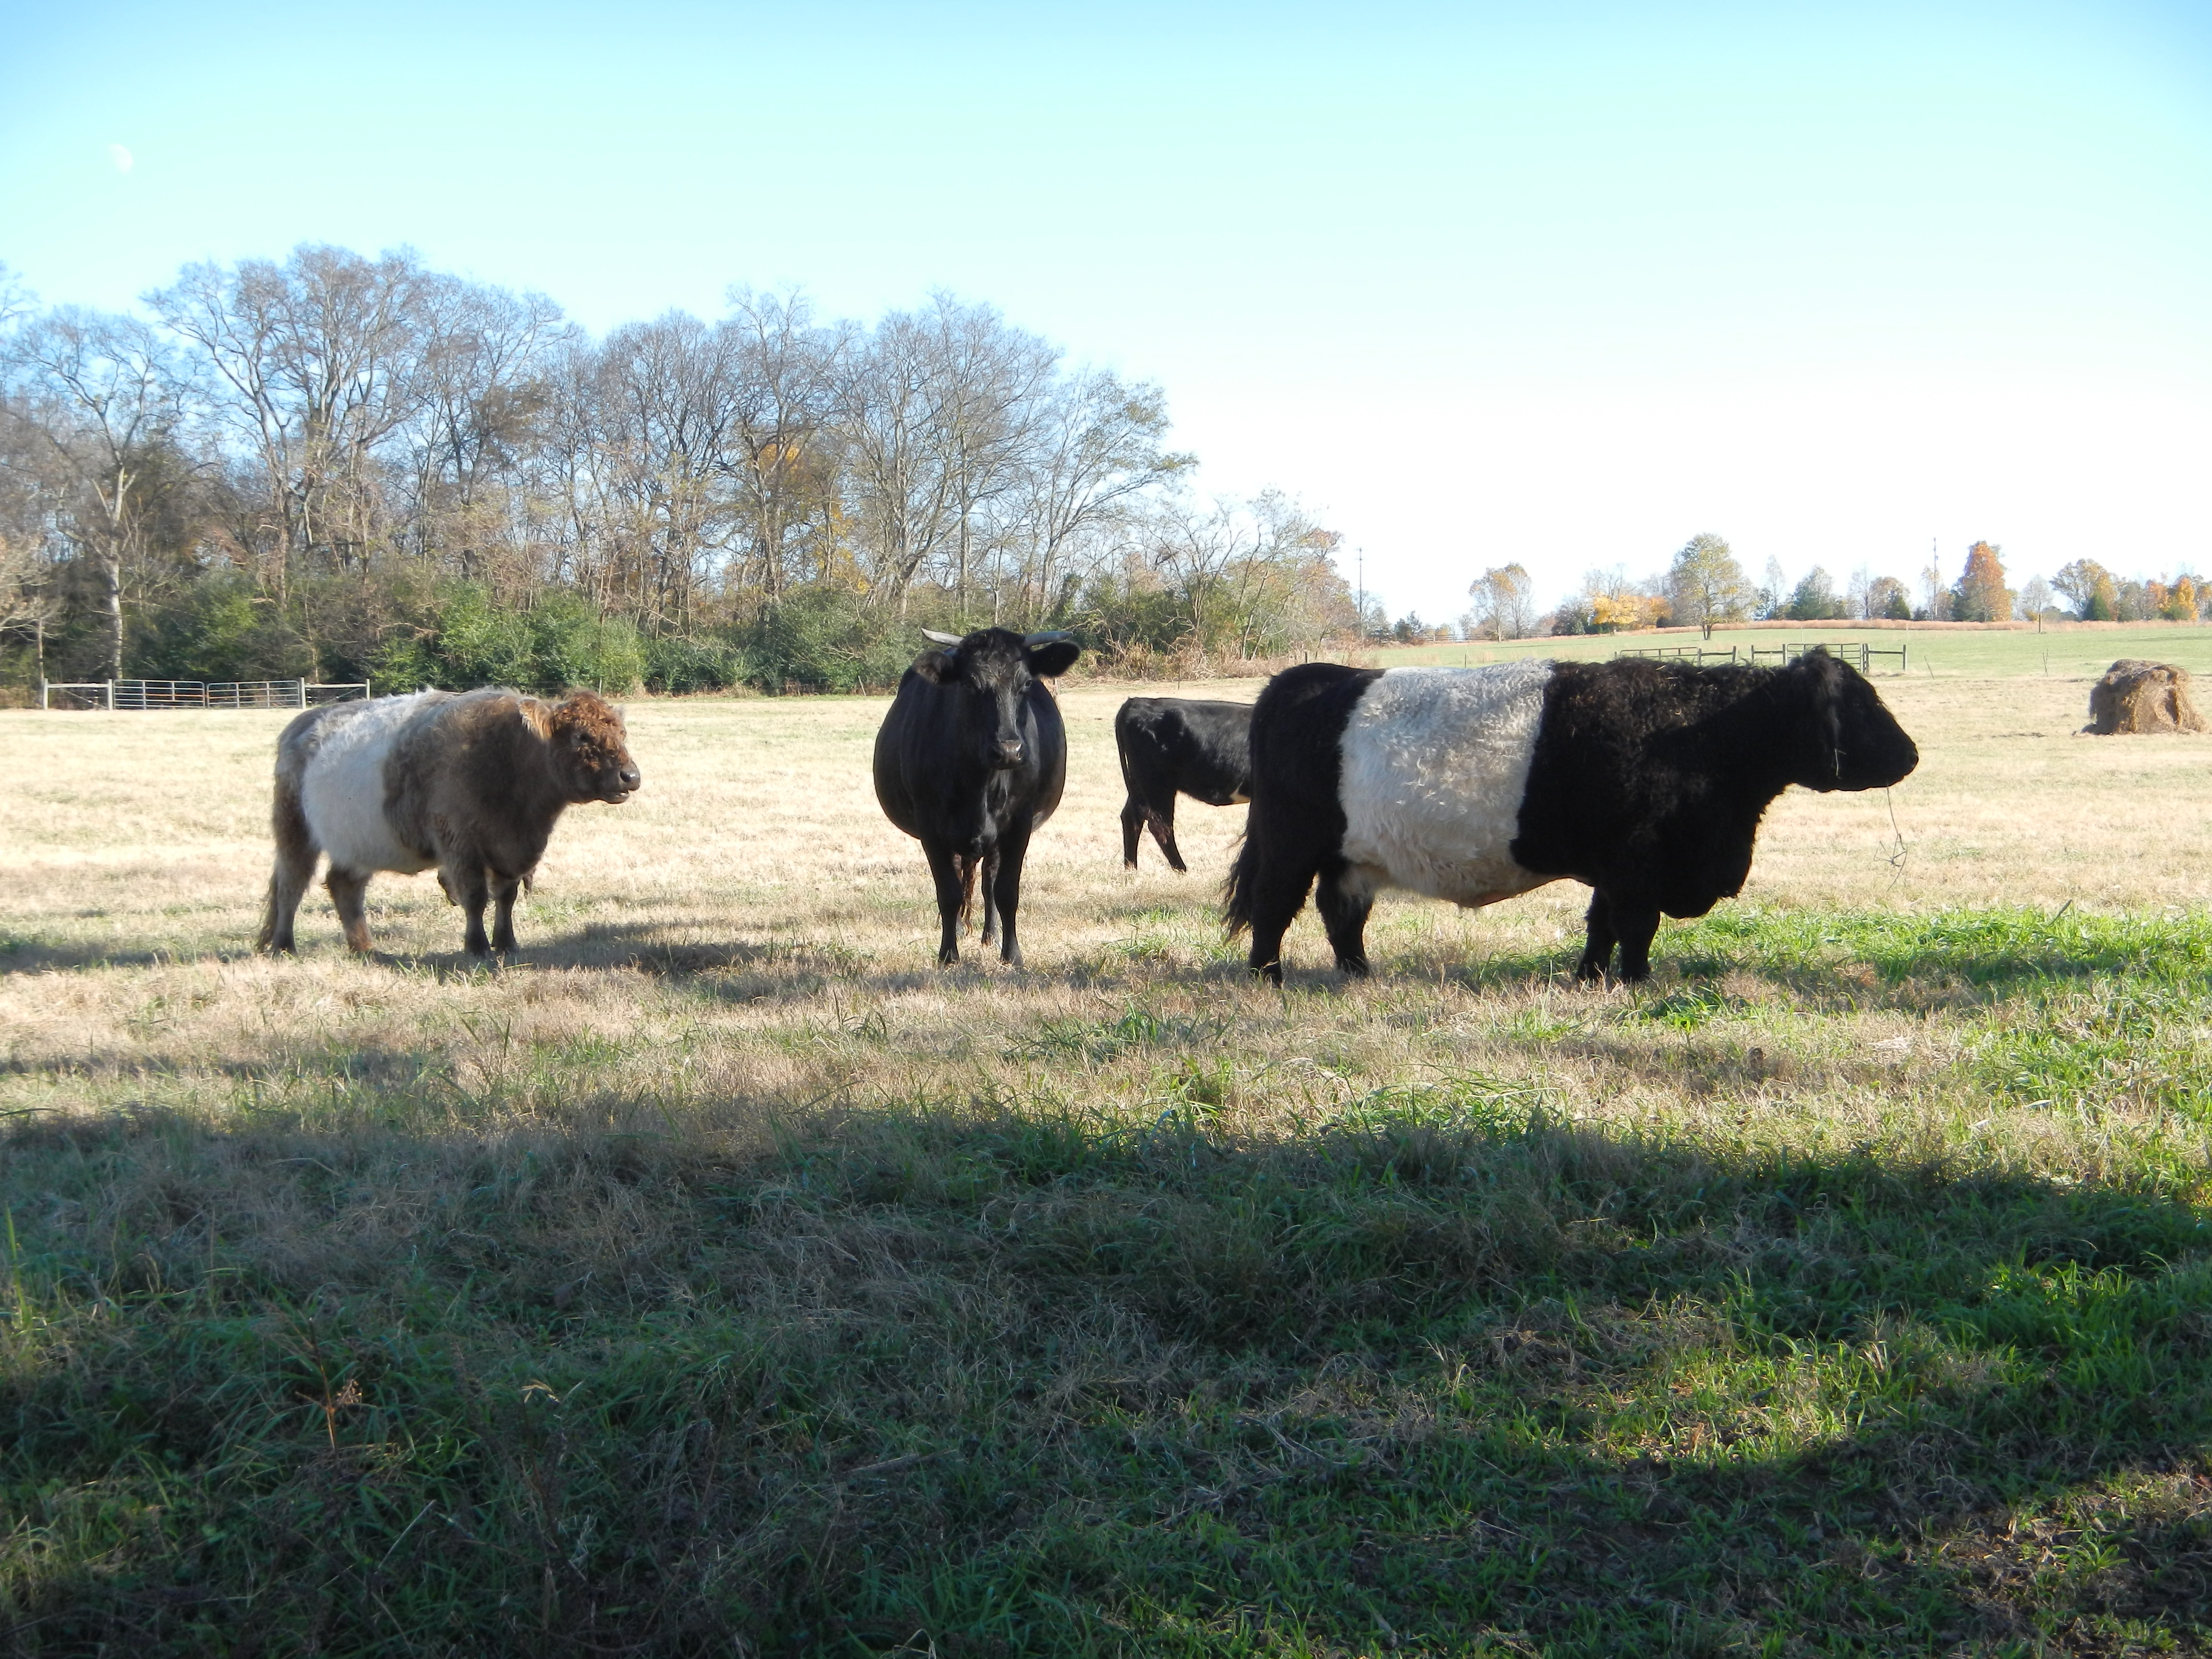 Here are some "Belted Galloway" cows.  They originate from the mountainous Galloway region of Scotland.